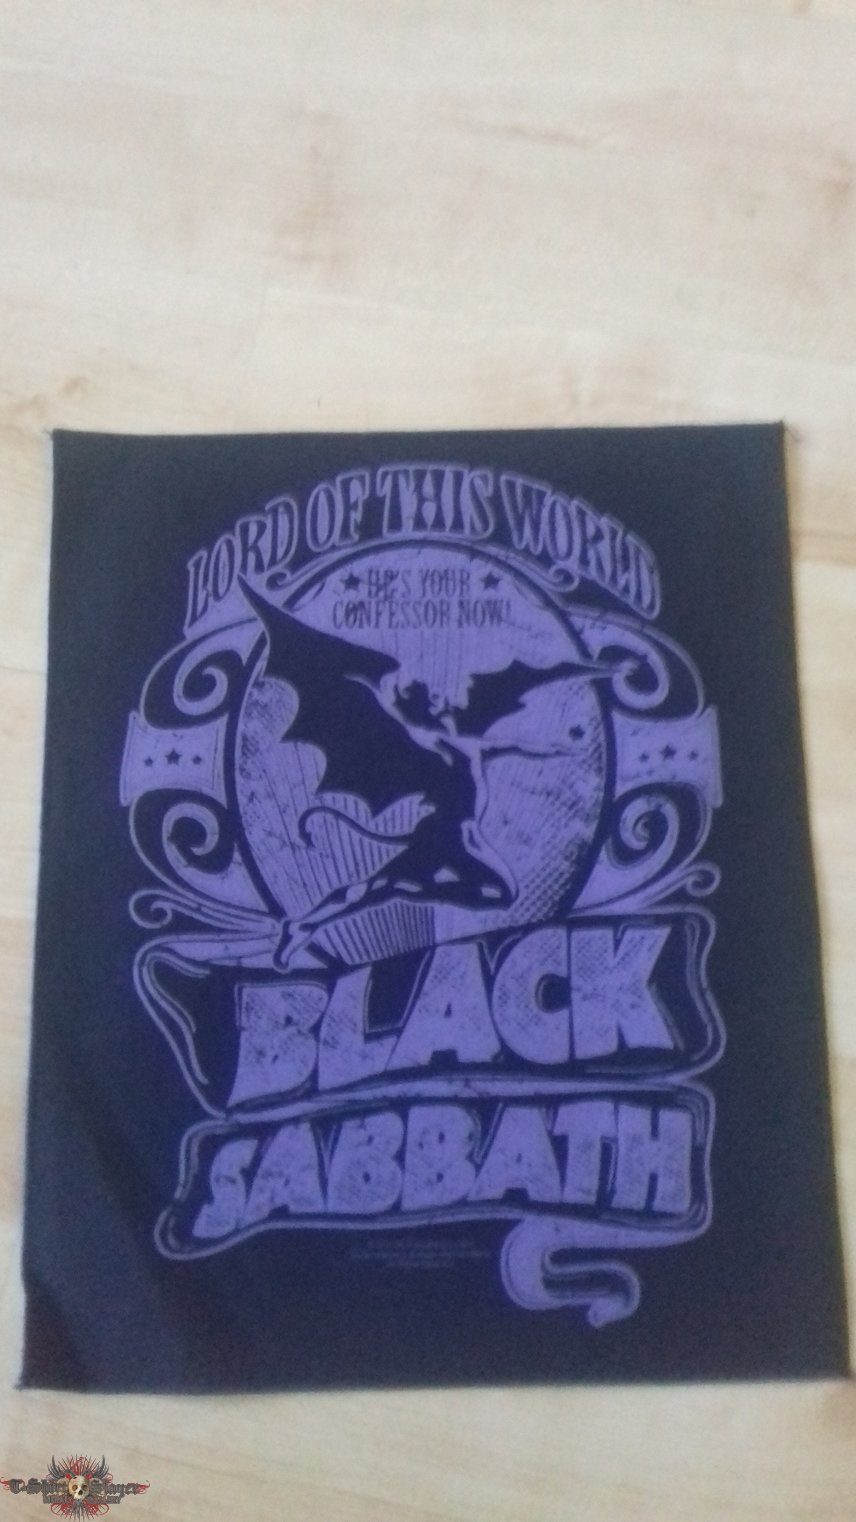 Black Sabbath - Lord of this world (Backpatch)